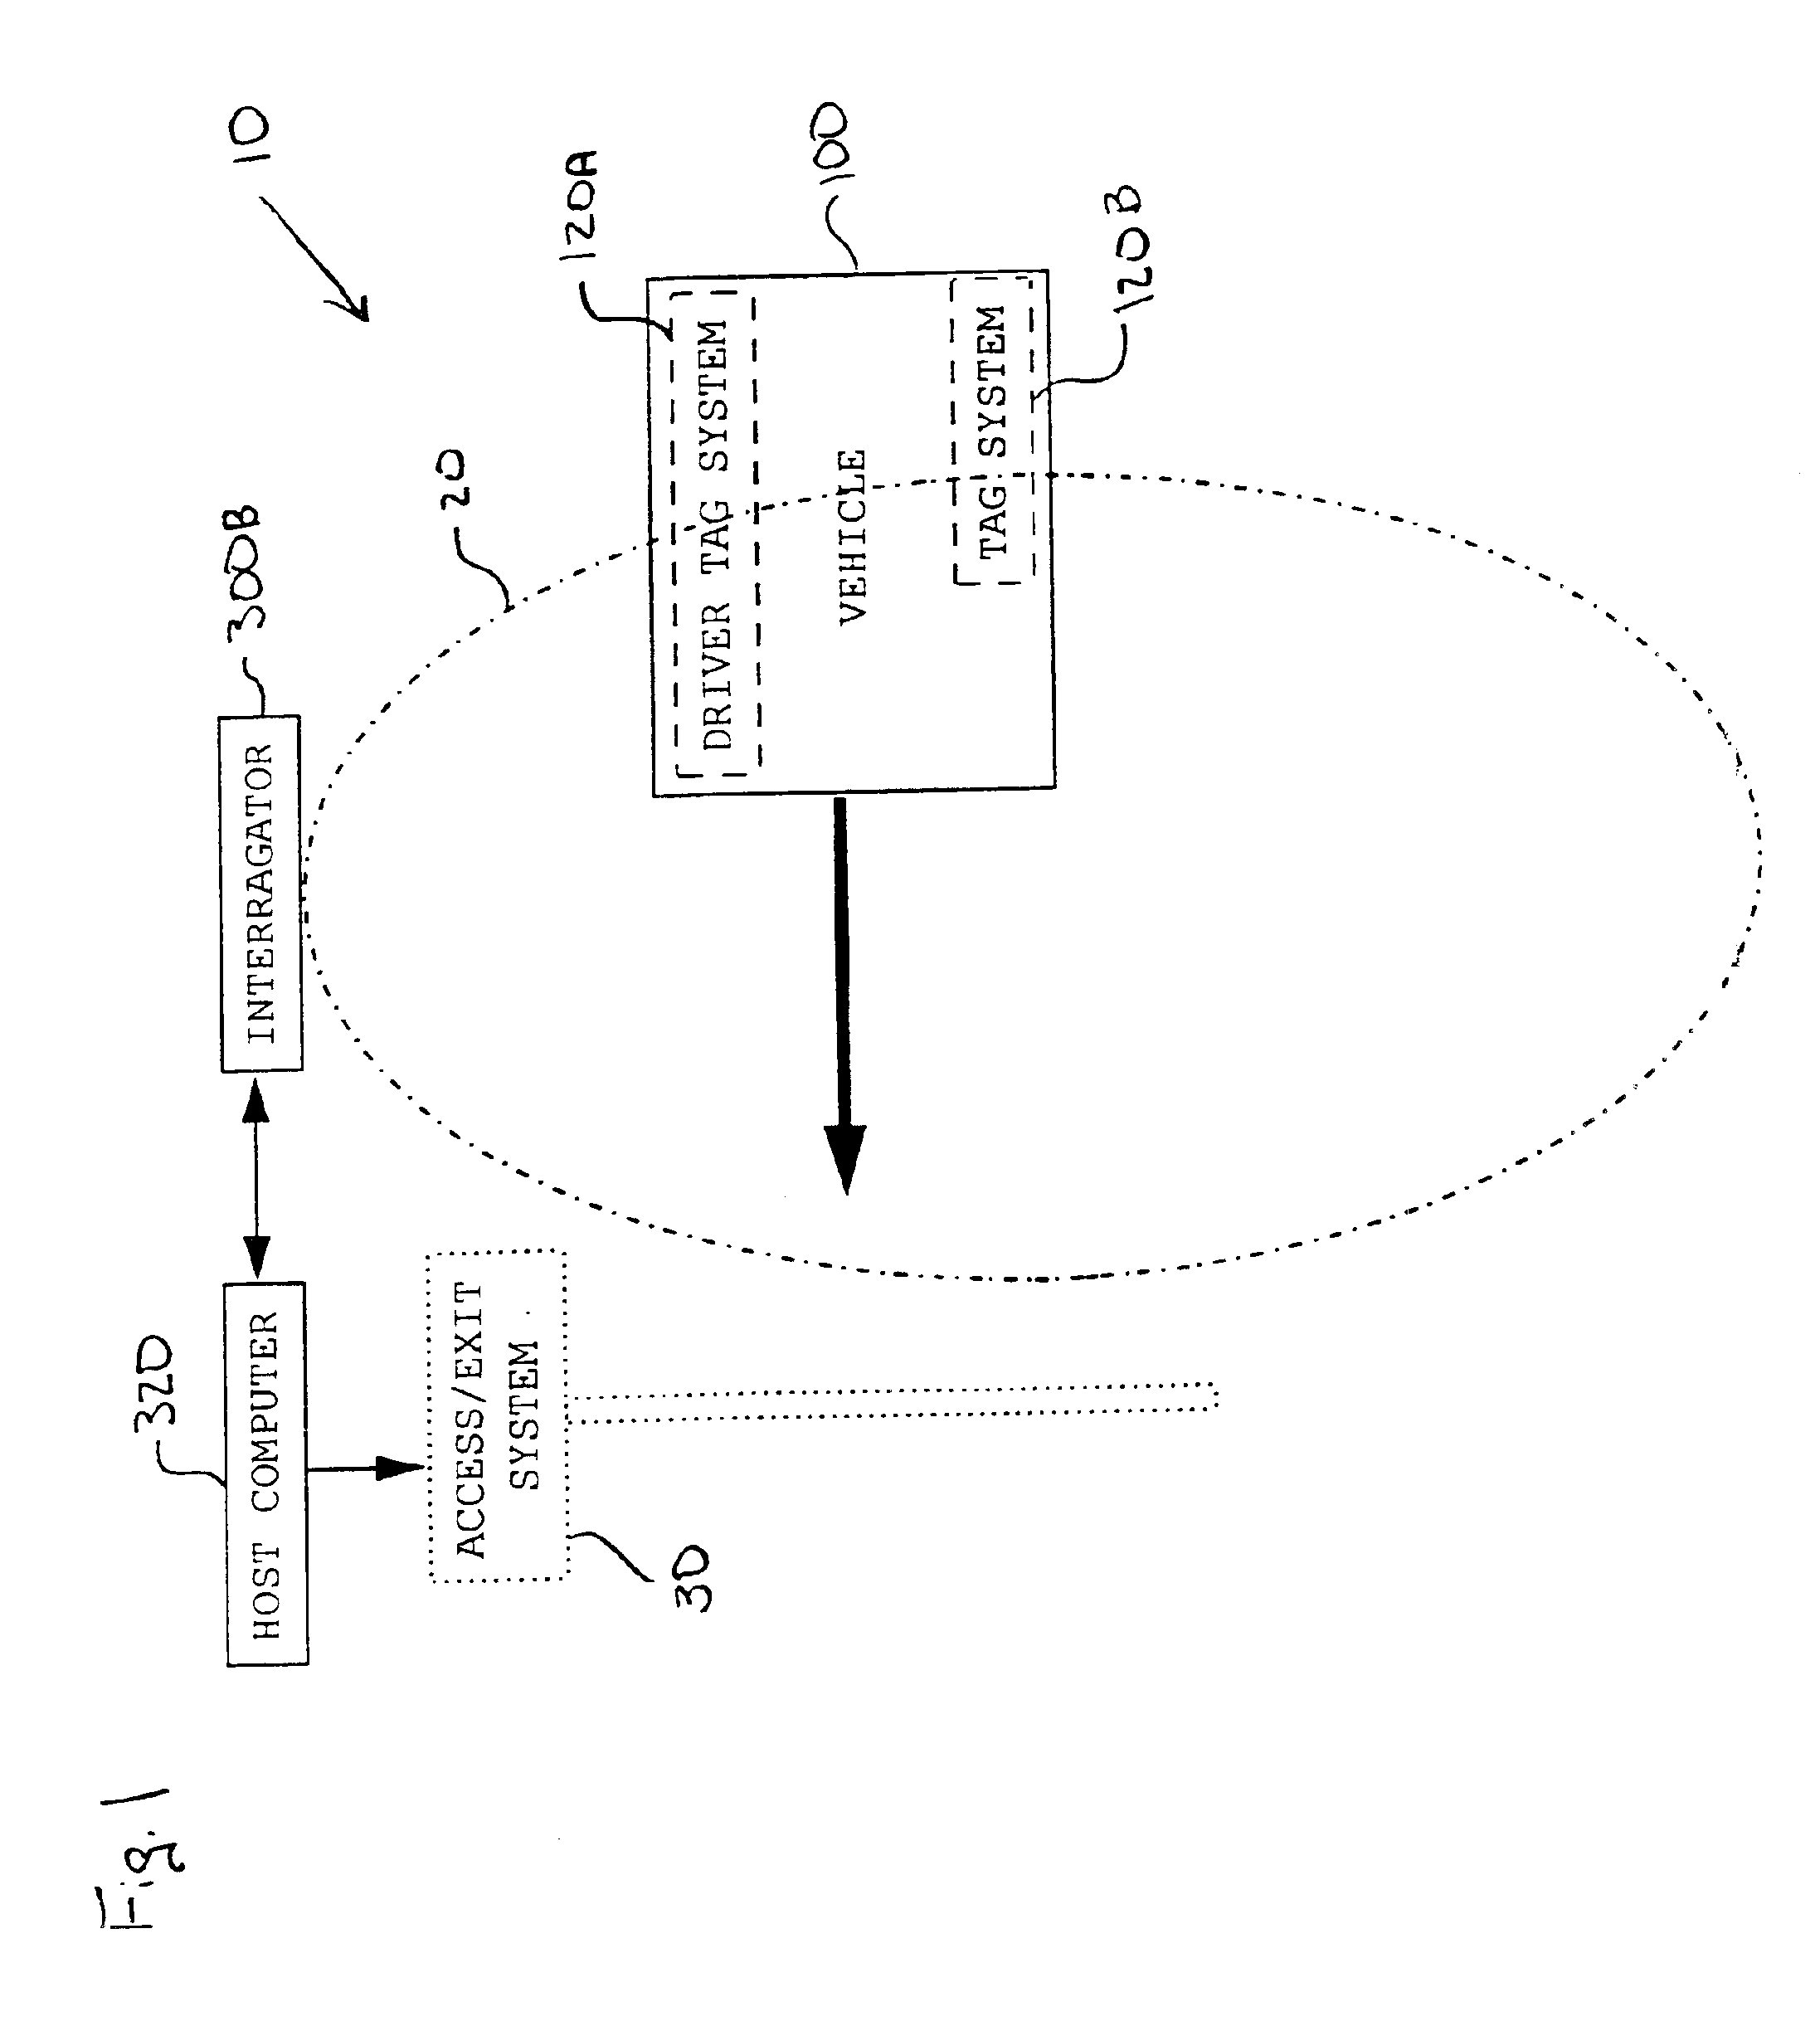 Encoding and decoding system